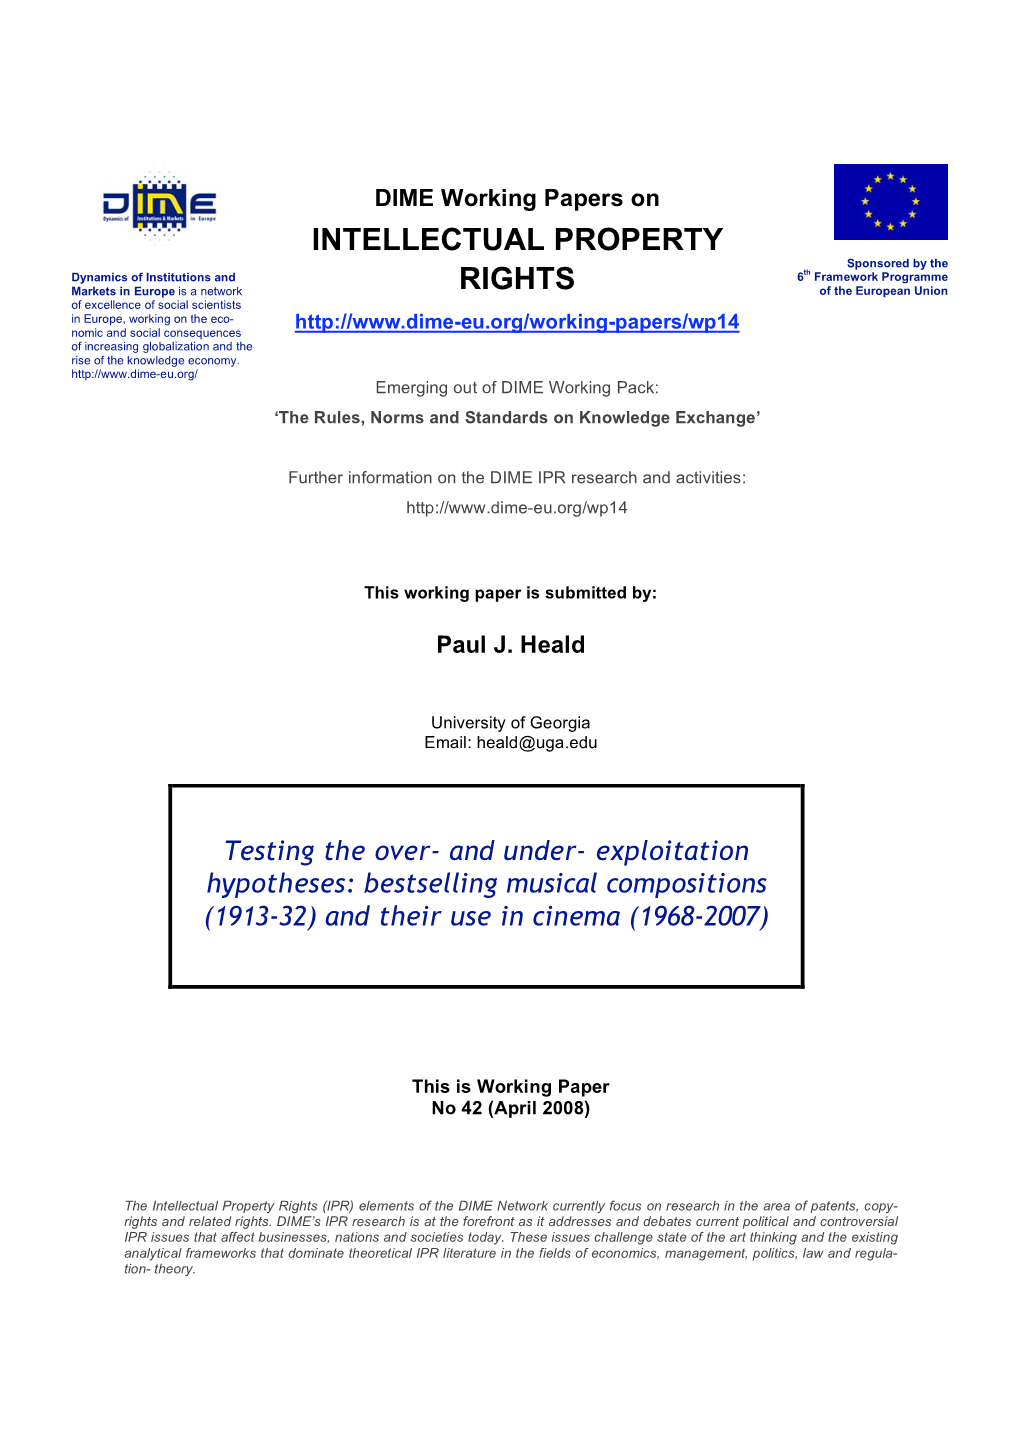 Intellectual Property Rights (IPR) Elements of the DIME Network Currently Focus on Research in the Area of Patents, Copy- Rights and Related Rights